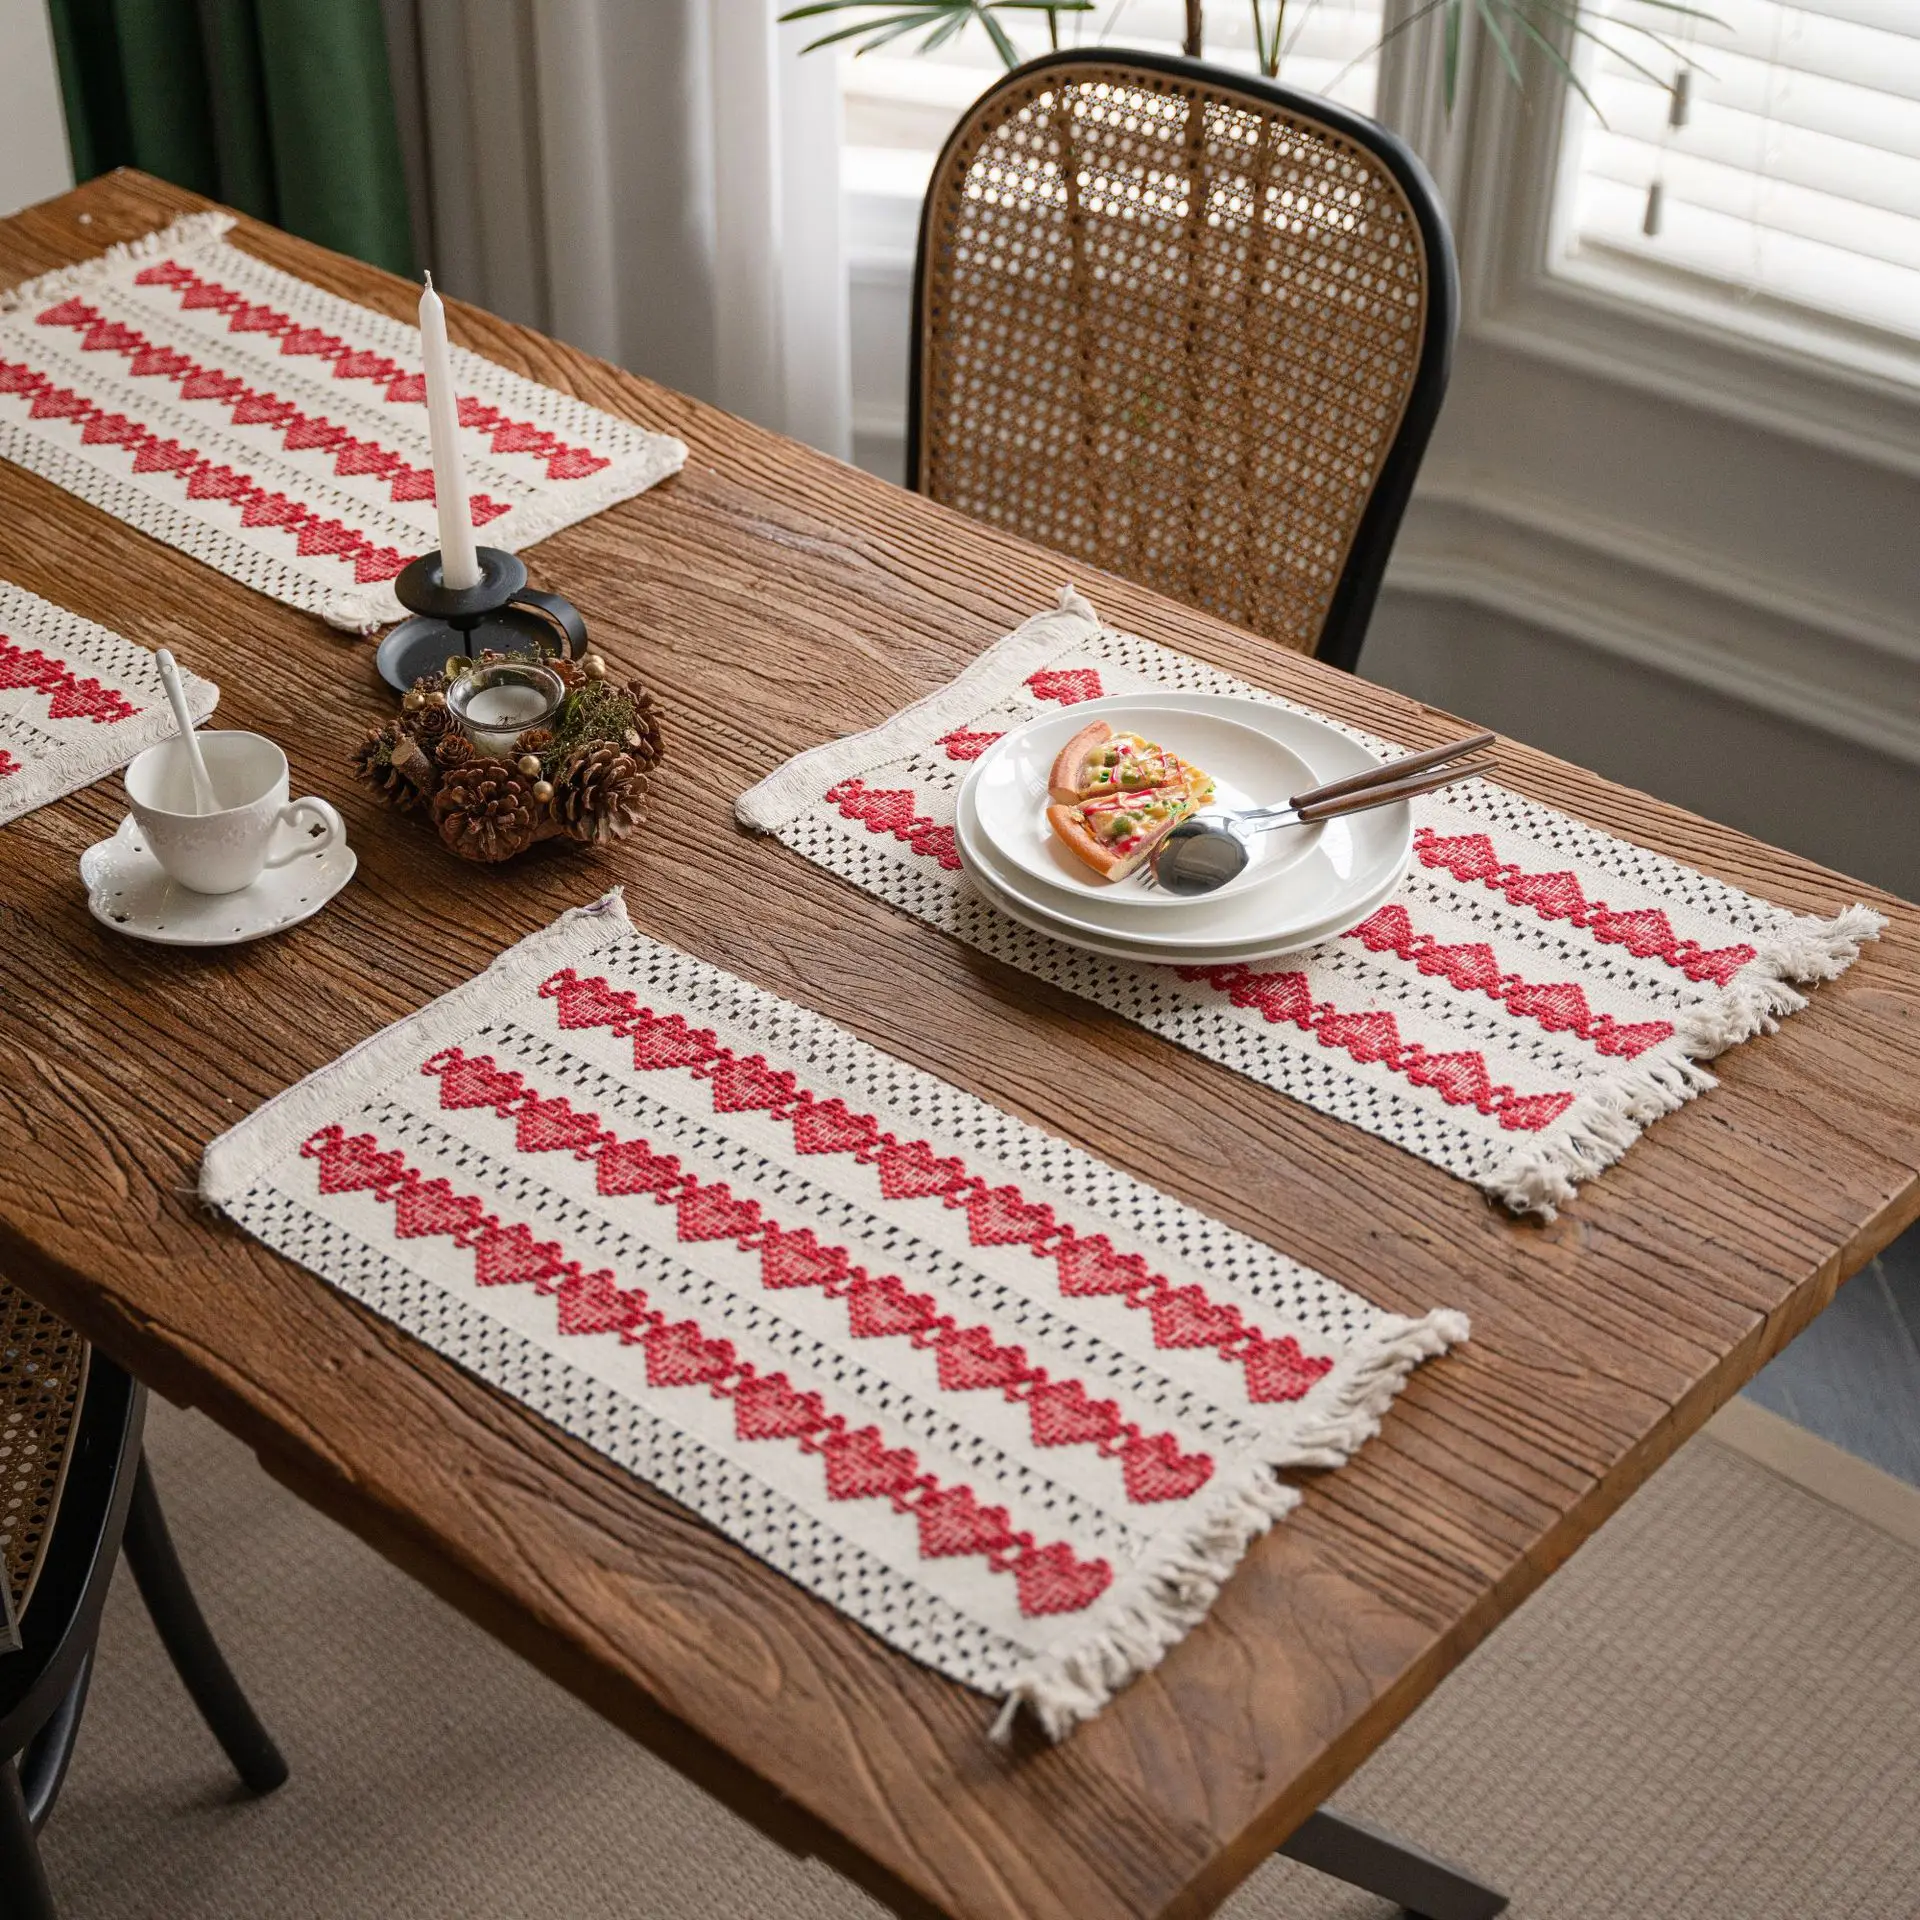 

30x50cm Cotton Linen Table Flag Cloth Stripe Tassel Tablecloth Rectangle Dust-Proof Kitchen Dinning Dining Red Love Decoration